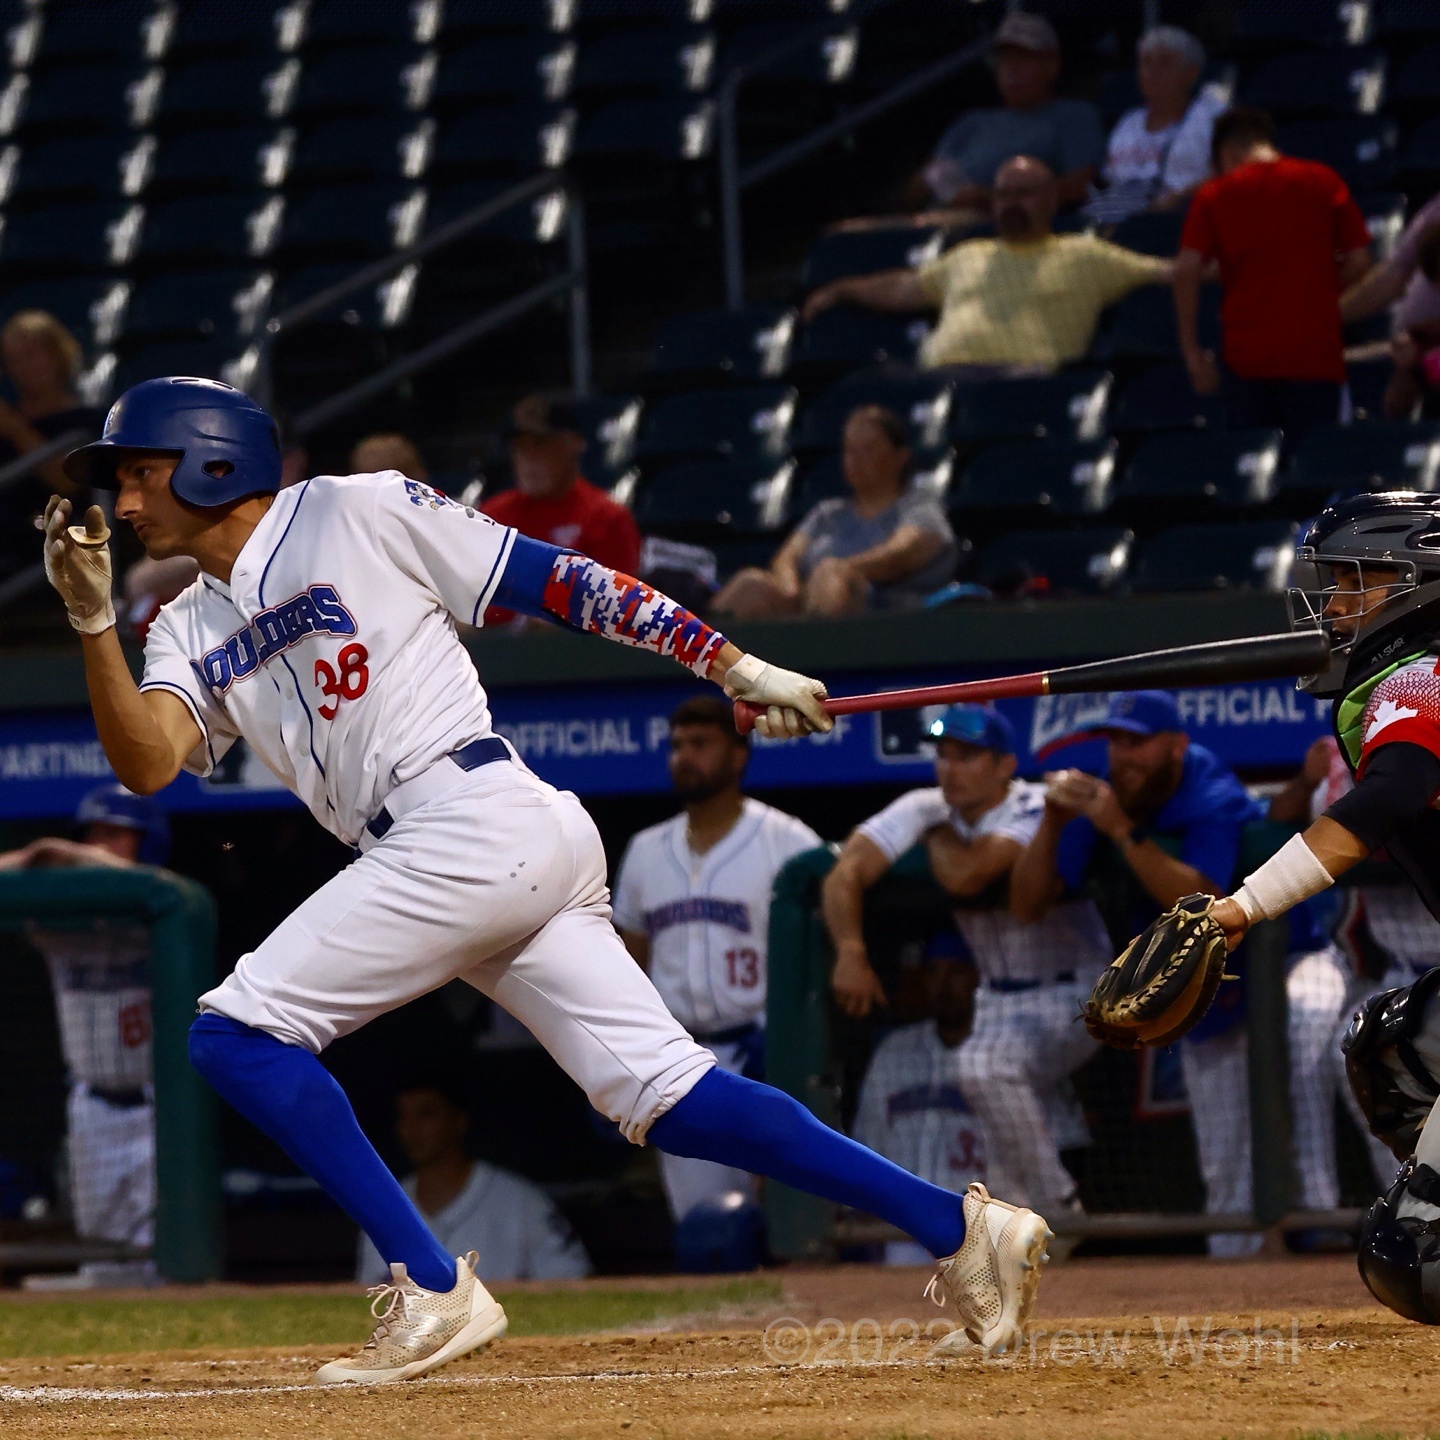 DENNIS' 4 RBI GIVE BOULDERS SERIES WIN VS. MINERS, 3 TEAMS FINISH SERIES SWEEP